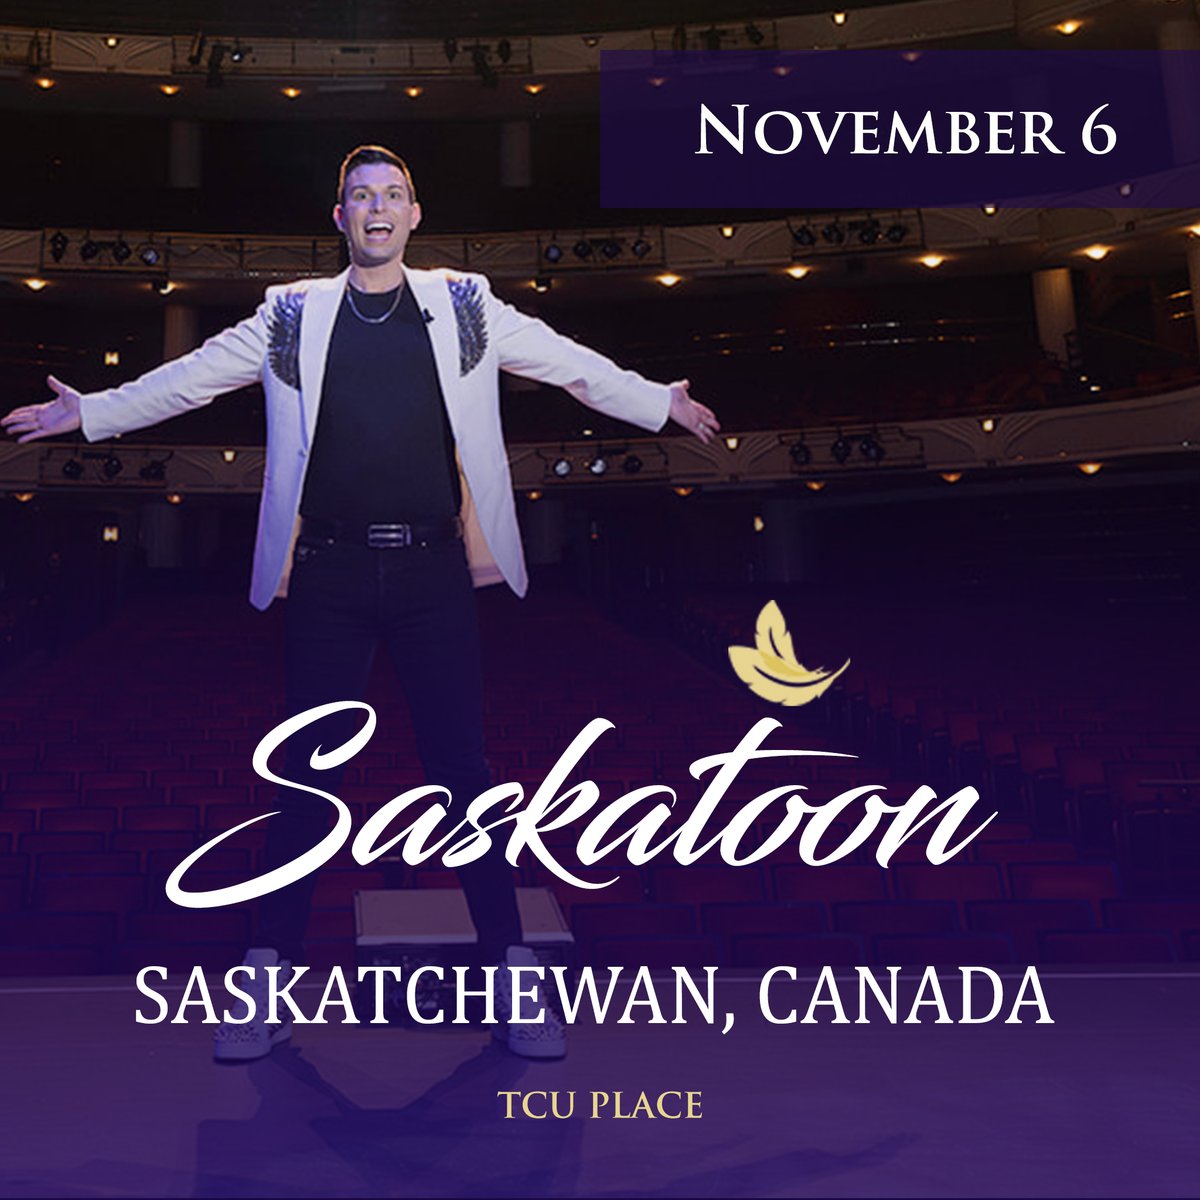 🇨🇦 The wait is over, Saskatoon! Join Matt Fraser, America's Top Psychic Medium, at TCU Place for an evening of heartfelt connections and Psychic Readings. Don’t miss out, purchase your tickets at MeetMattFraser.com